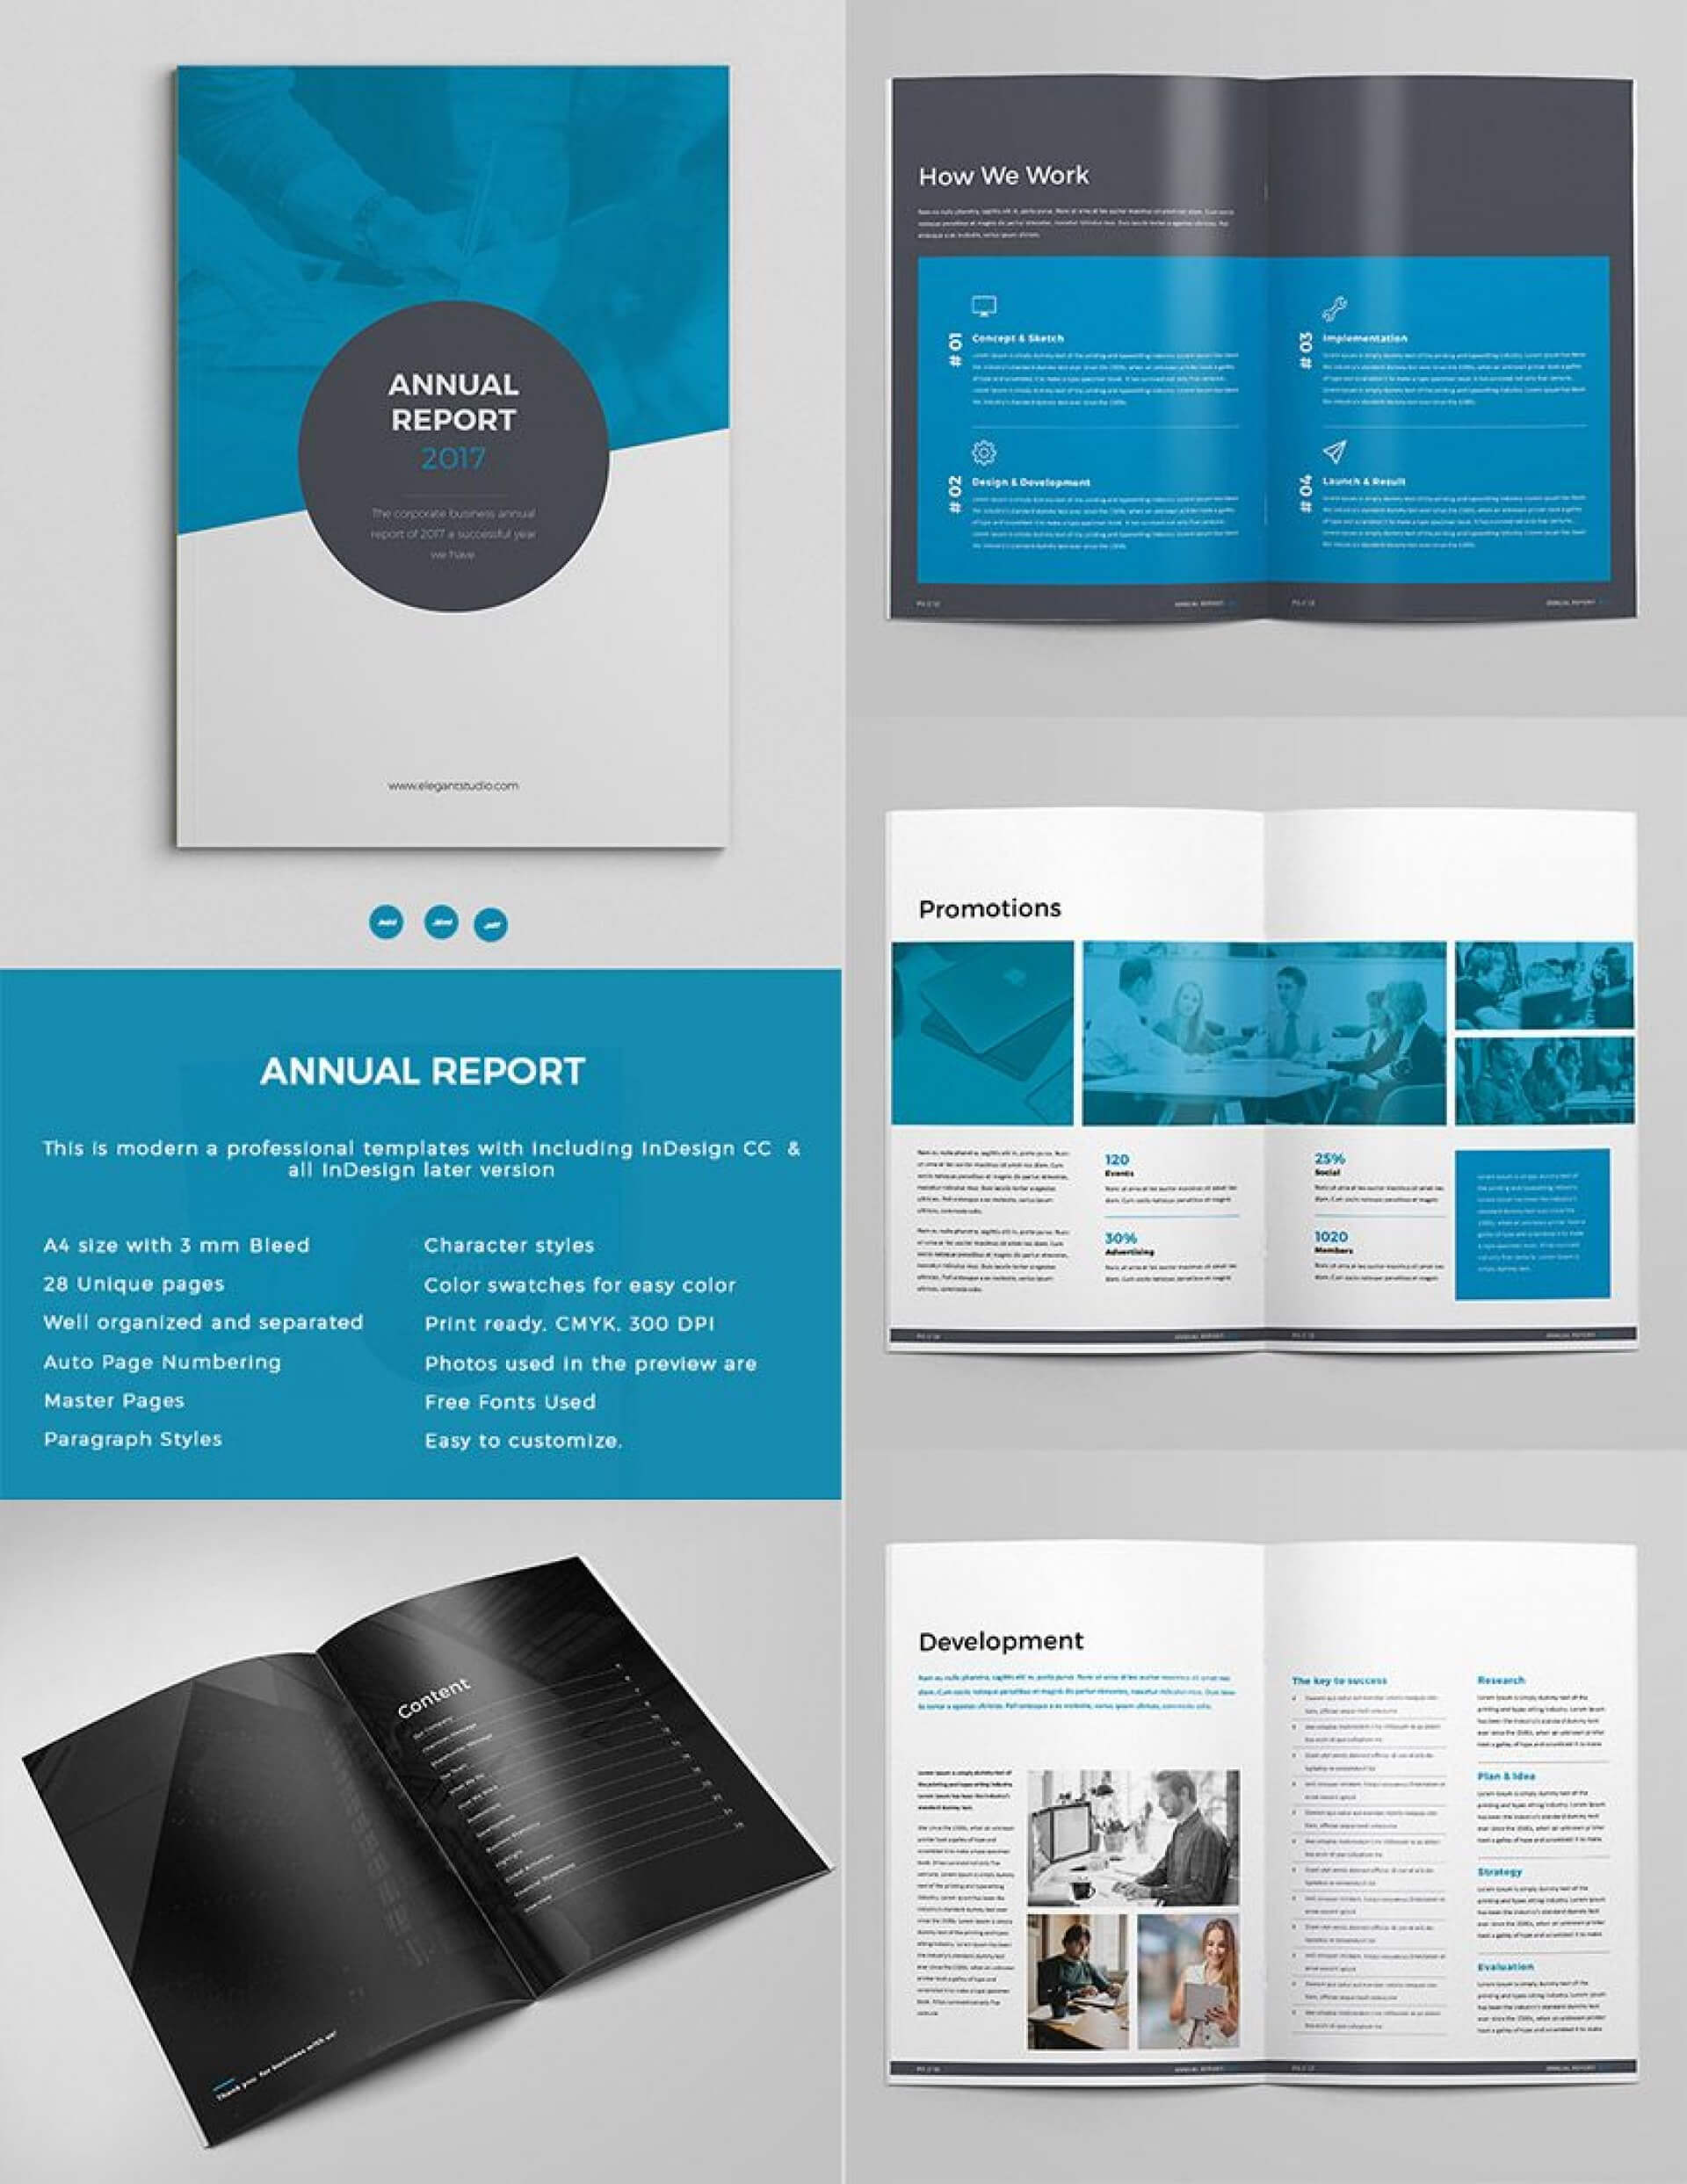 004 Free Annual Report Template Indesign Exceptional Ideas Inside Free Annual Report Template Indesign